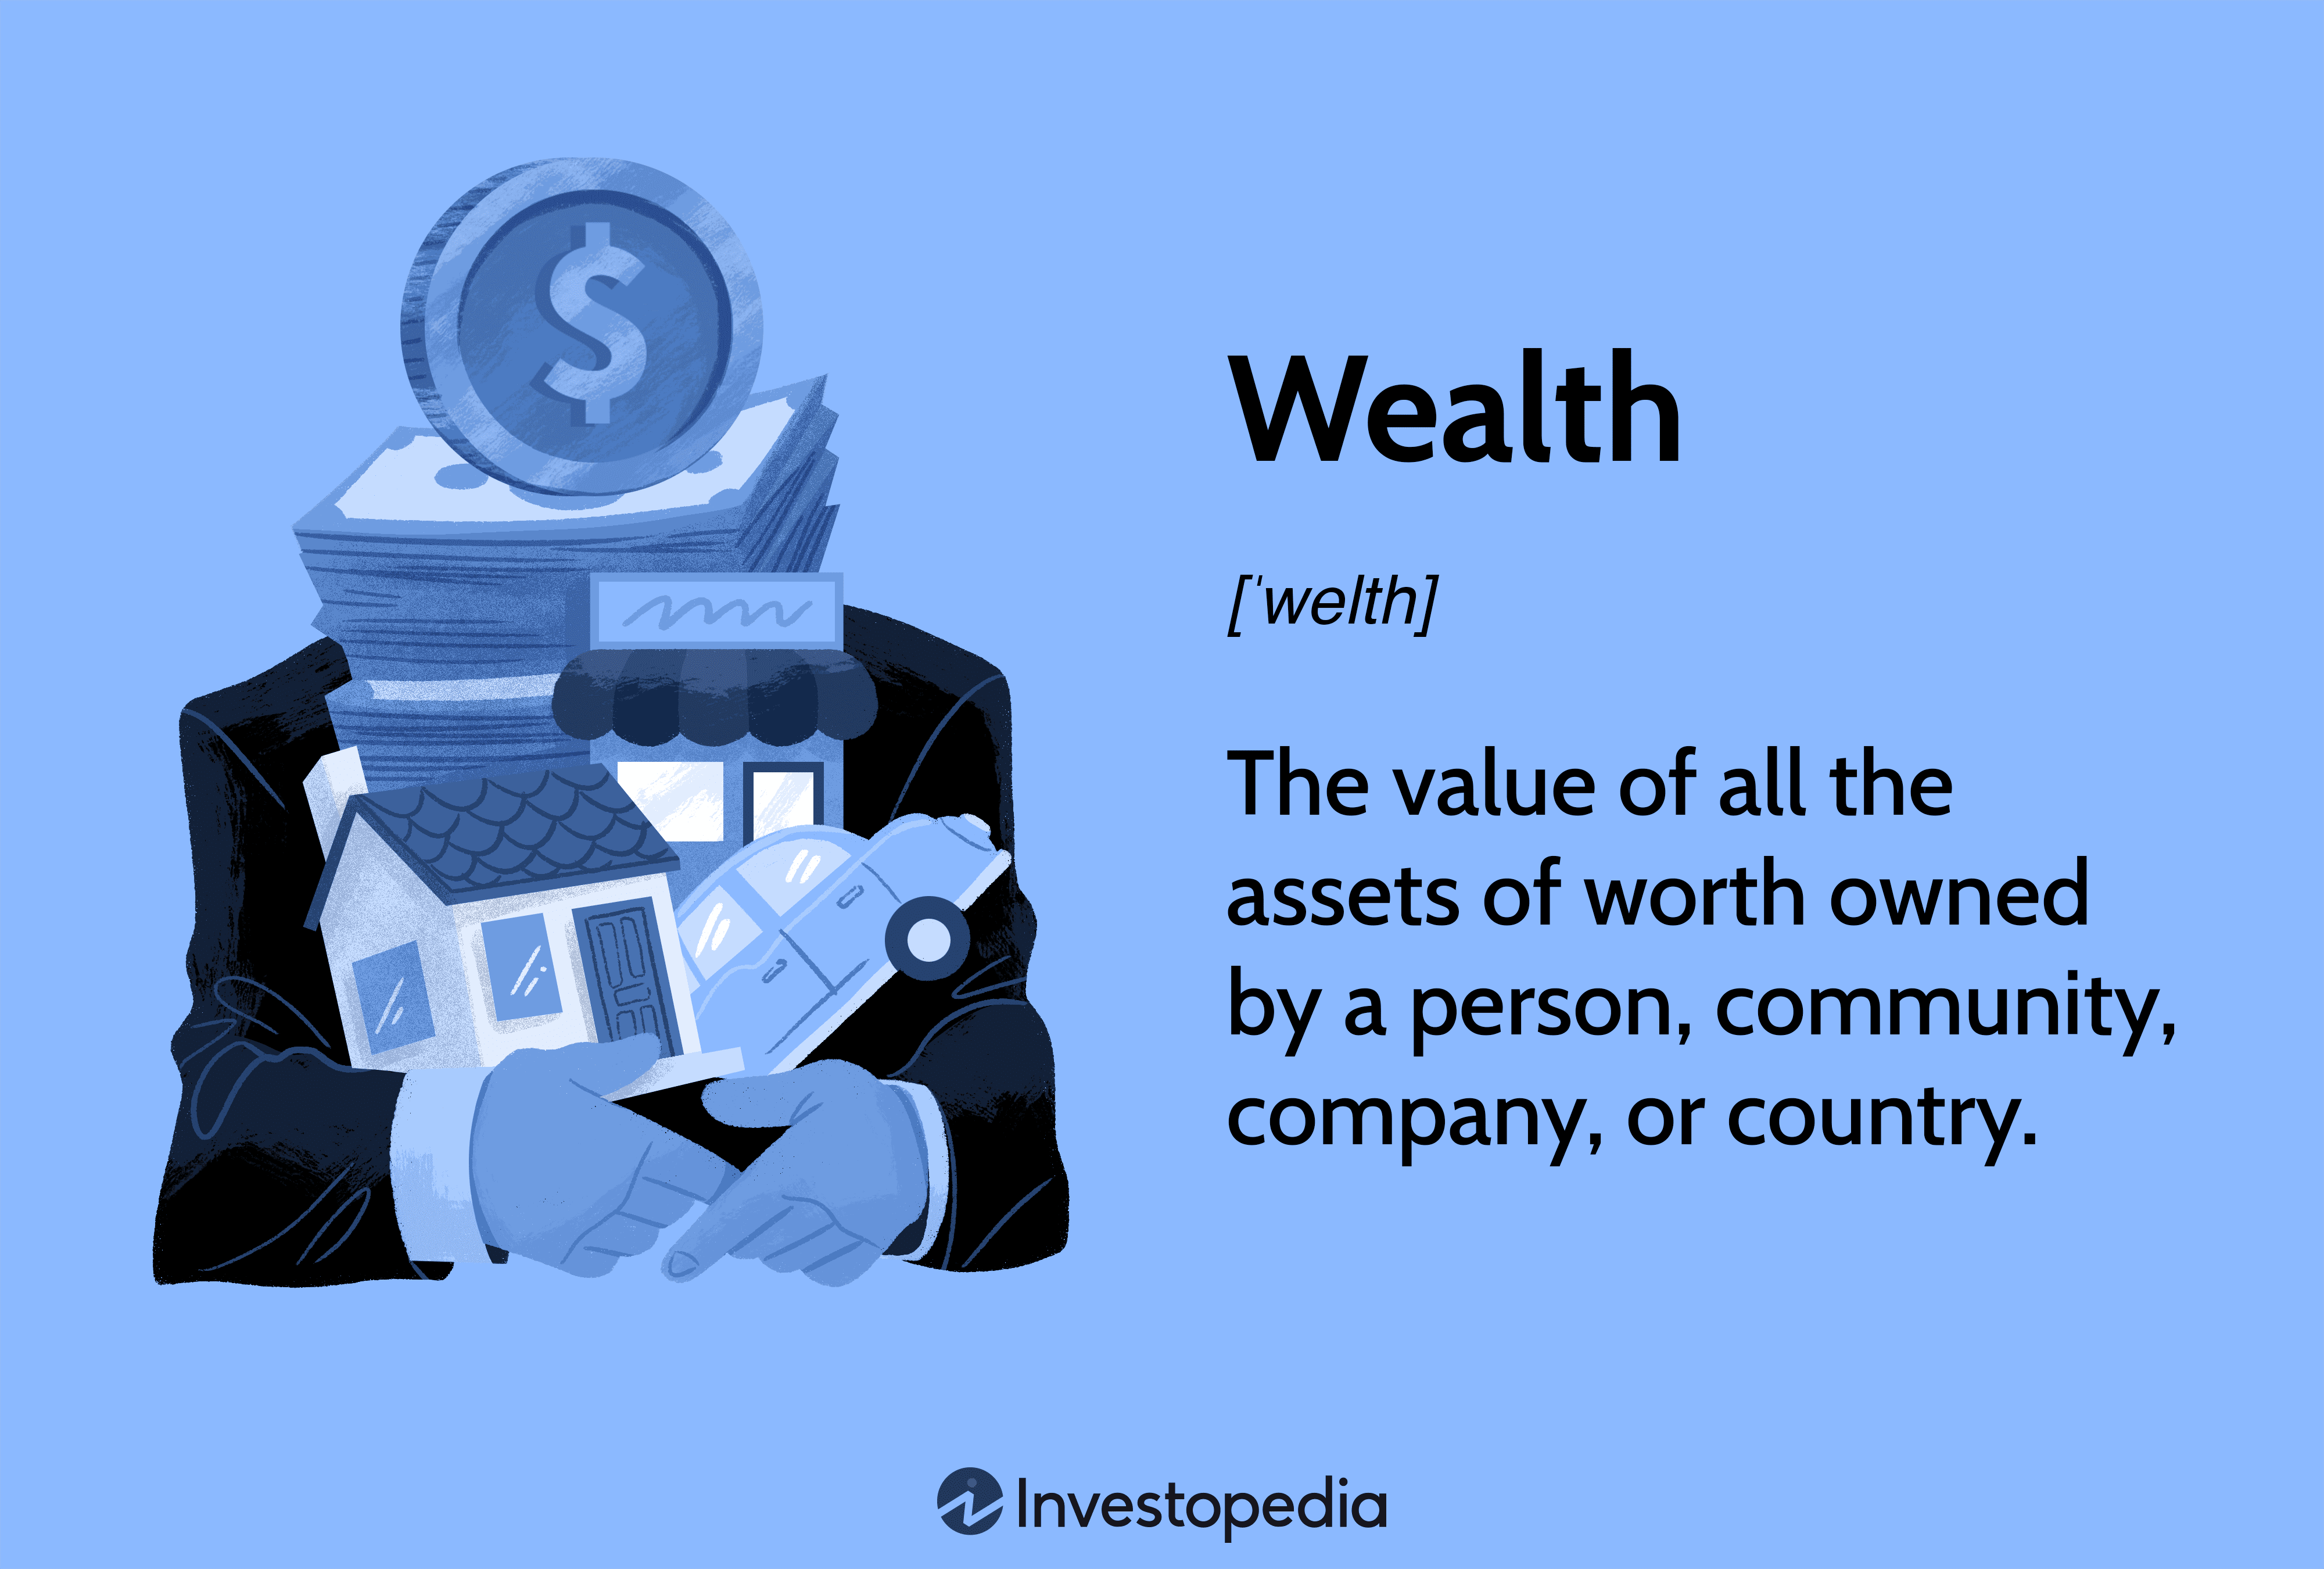 Wealth: The value of all the assets of worth owned by a person, community, company, or country.